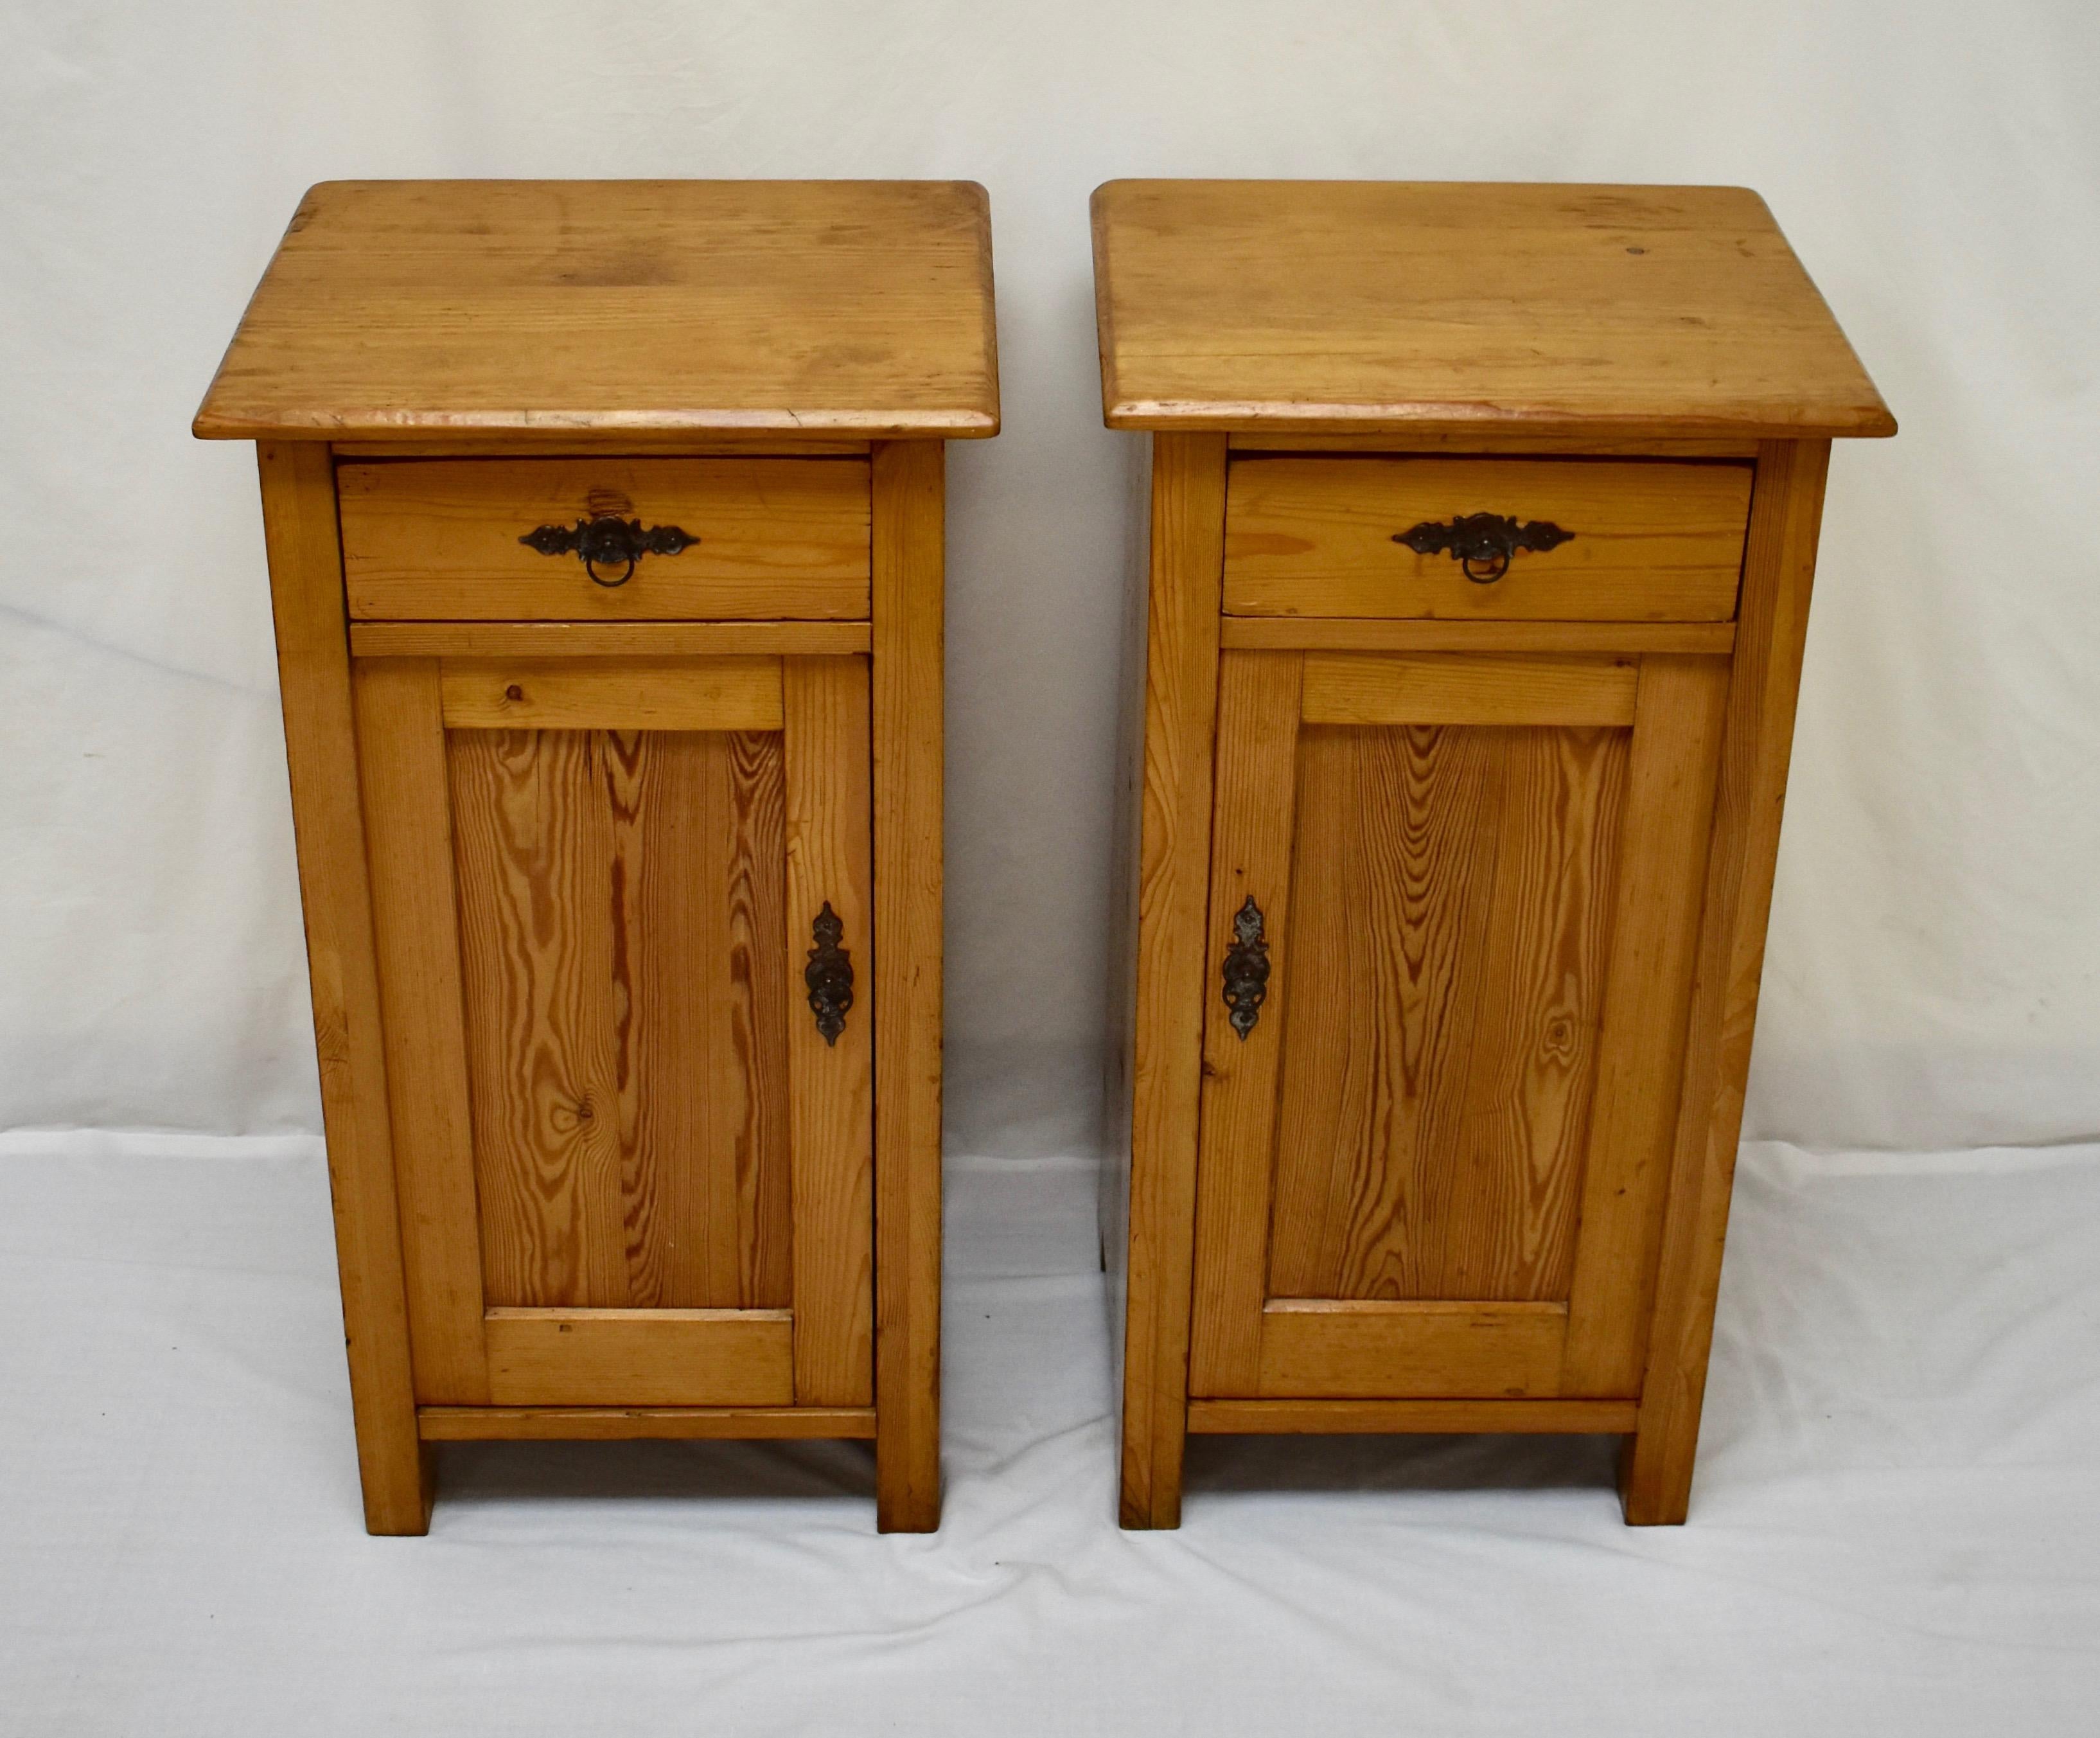 ANG02, pair of pine nightstands 17 x 15 x 31.5 Netherlands, circa 1900. $995.00
A classic pair of European pine nightstands in the popular one door, one drawer configuration. Each drawer has hand-cut dovetails front and back and each door has a